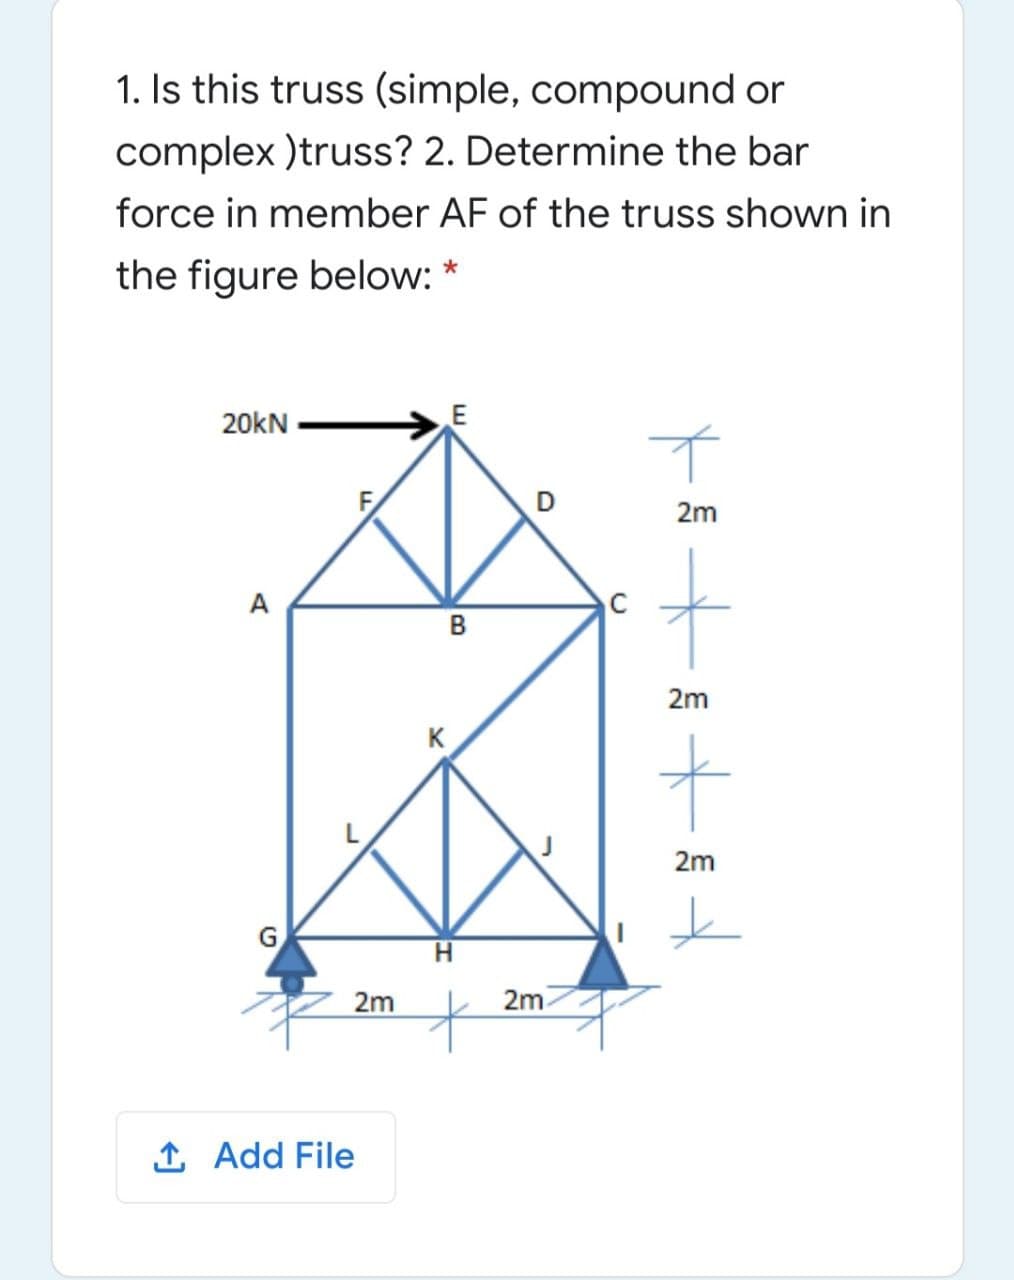 1. Is this truss (simple, compound or
complex )truss? 2. Determine the bar
force in member AF of the truss shown in
the figure below: *
20kN
E
D
2m
A
в
2m
K
2m
G
2m
2m
1 Add File
